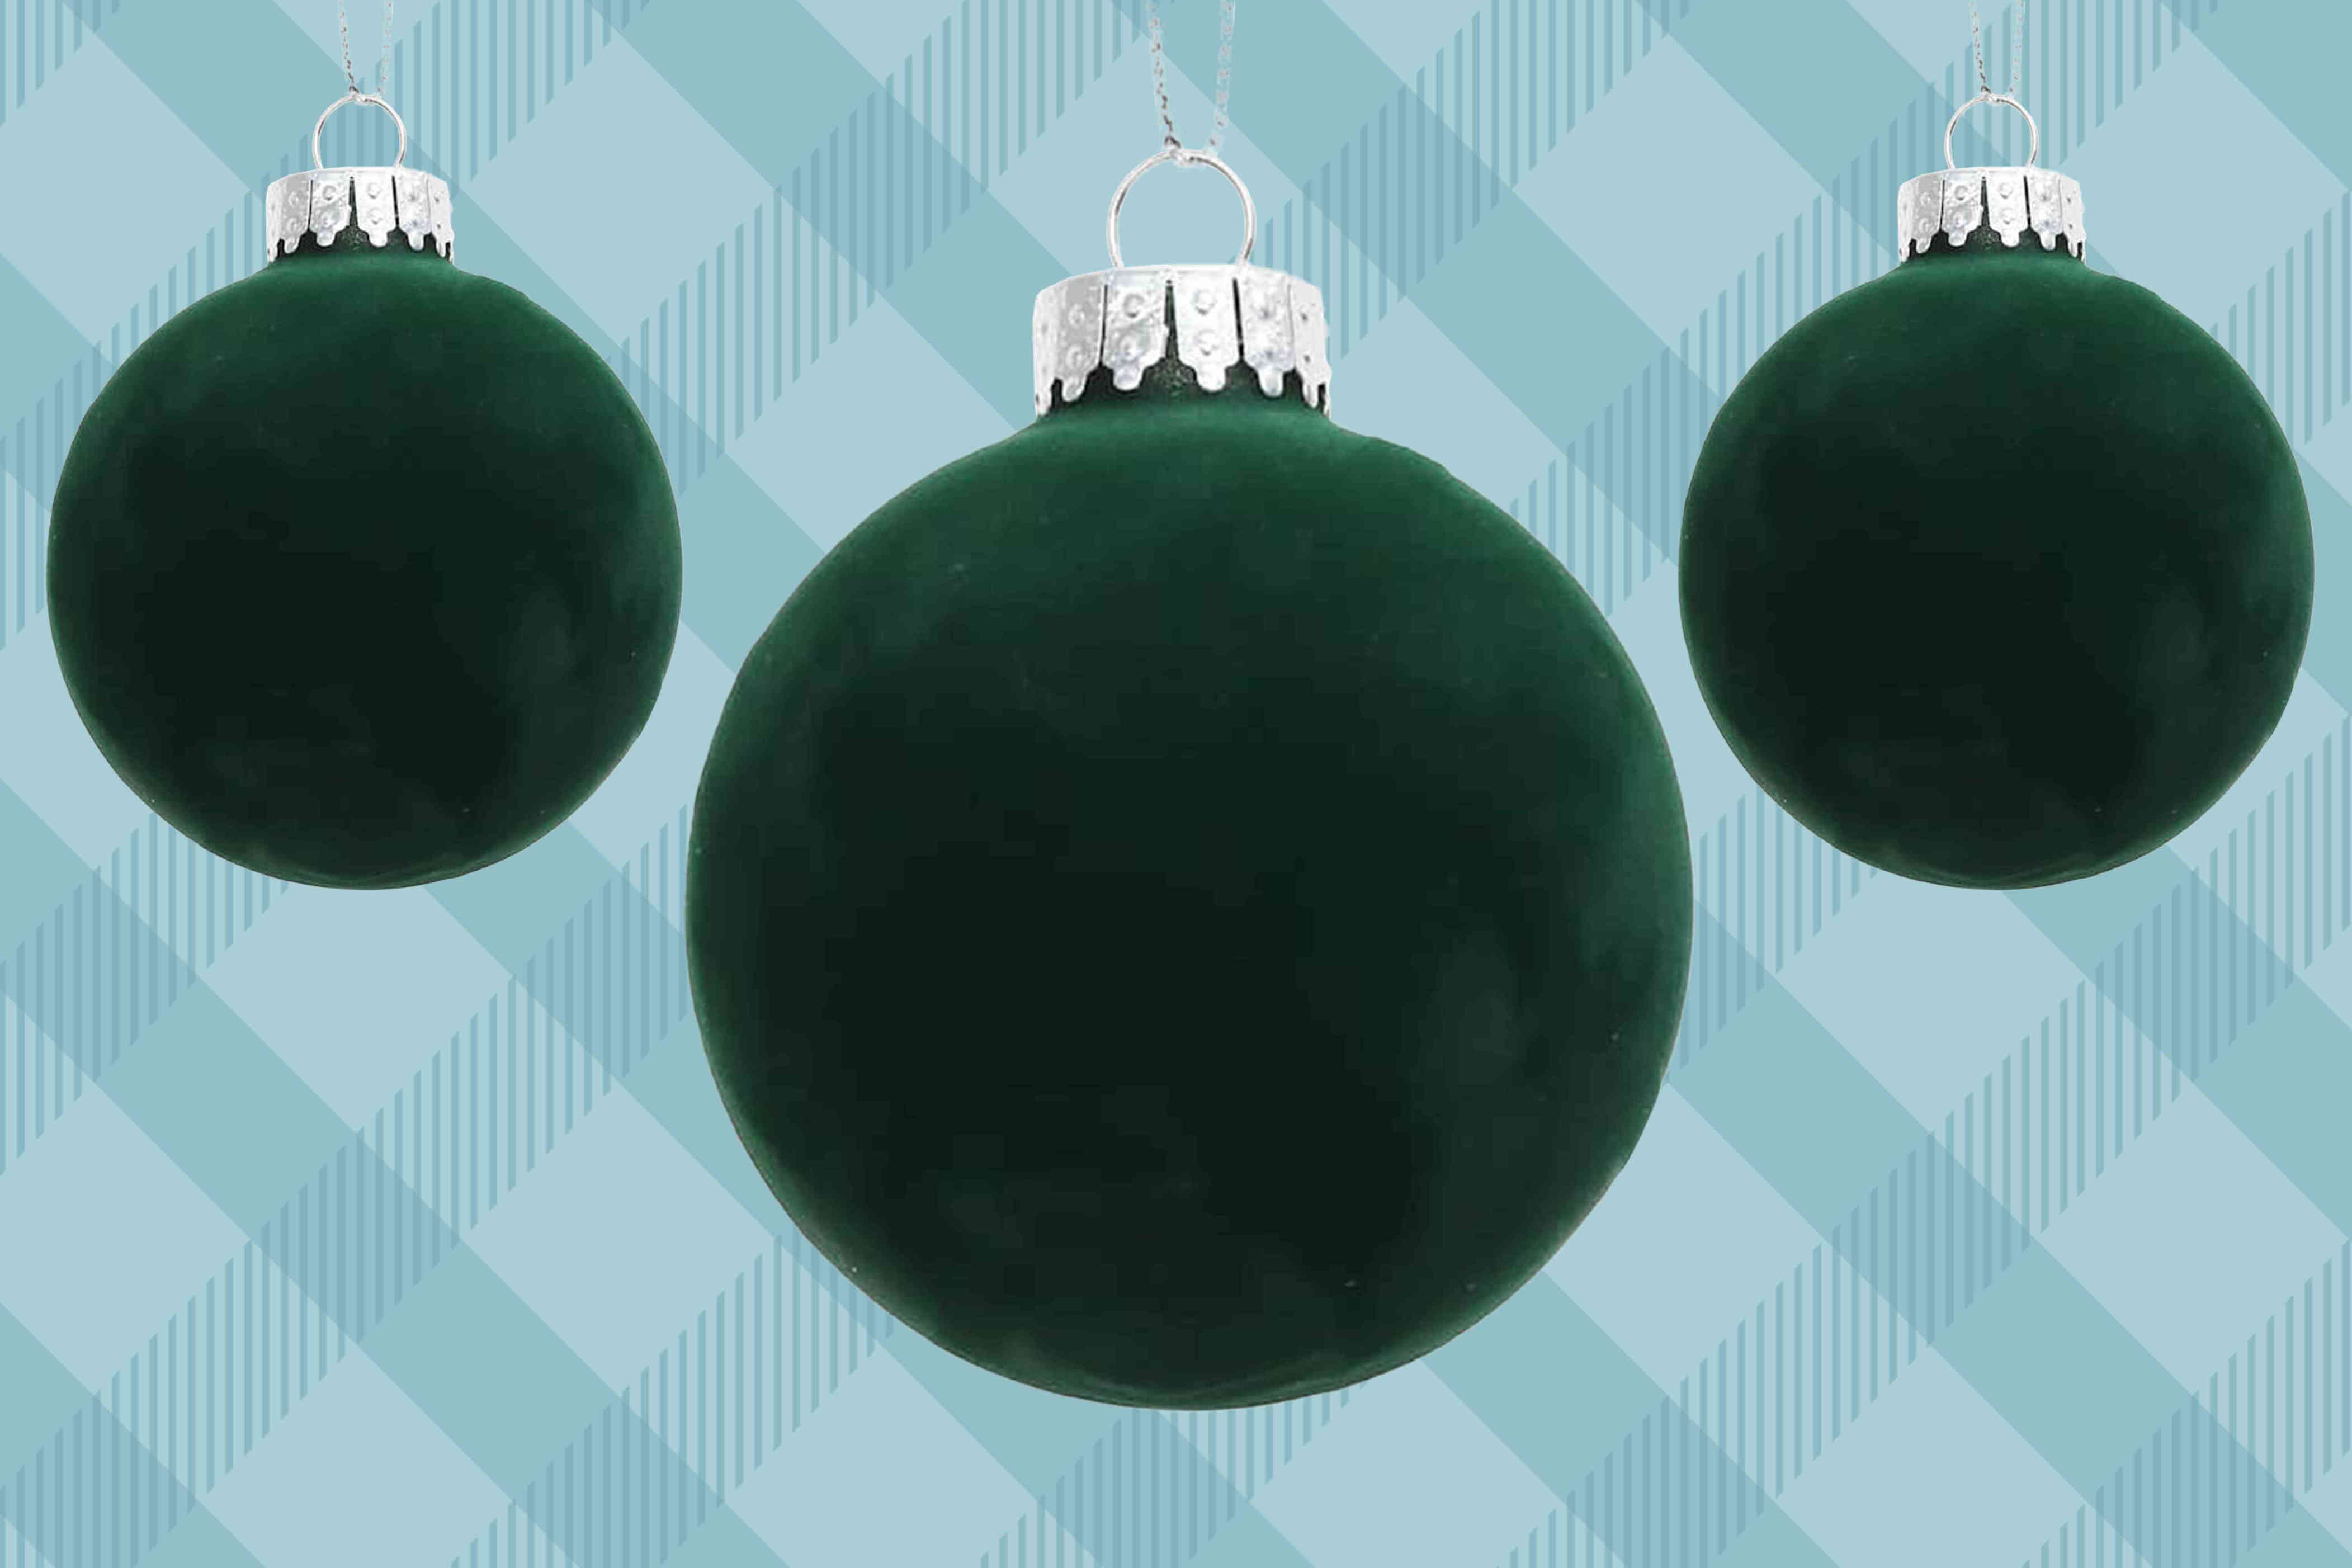 These Studio McGee velvet ornaments sell out so fast every season but